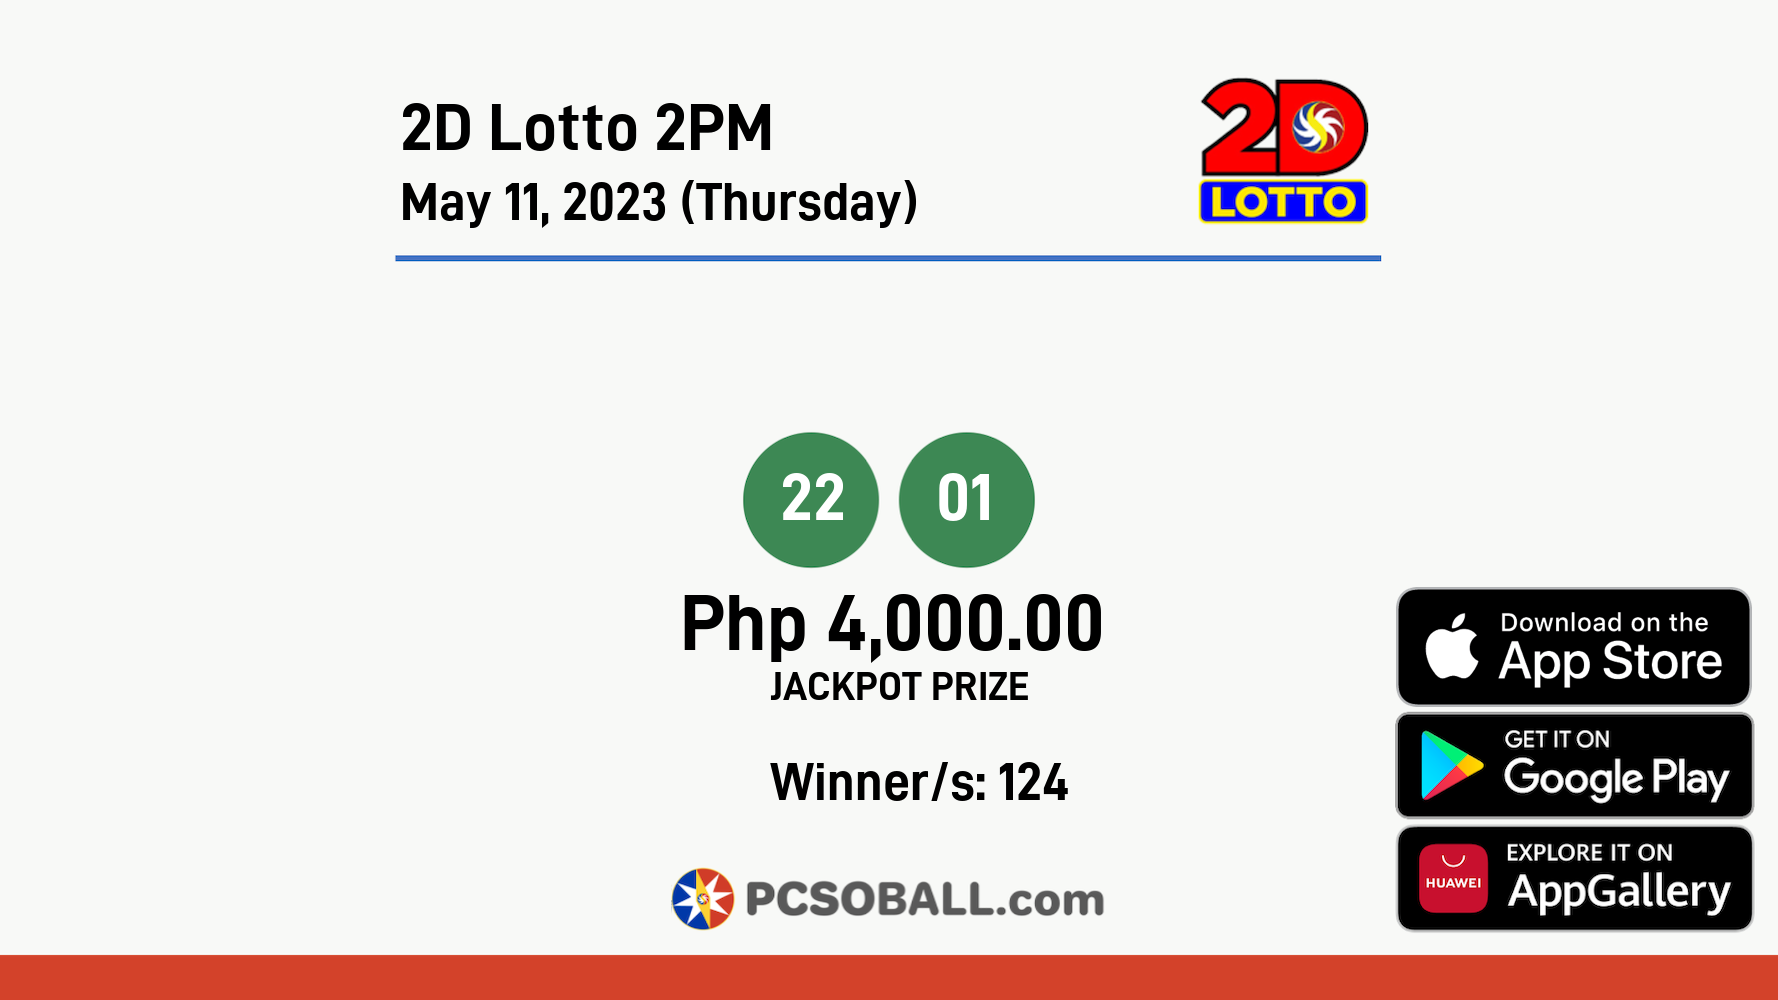 2D Lotto 2PM May 11, 2023 (Thursday) Result